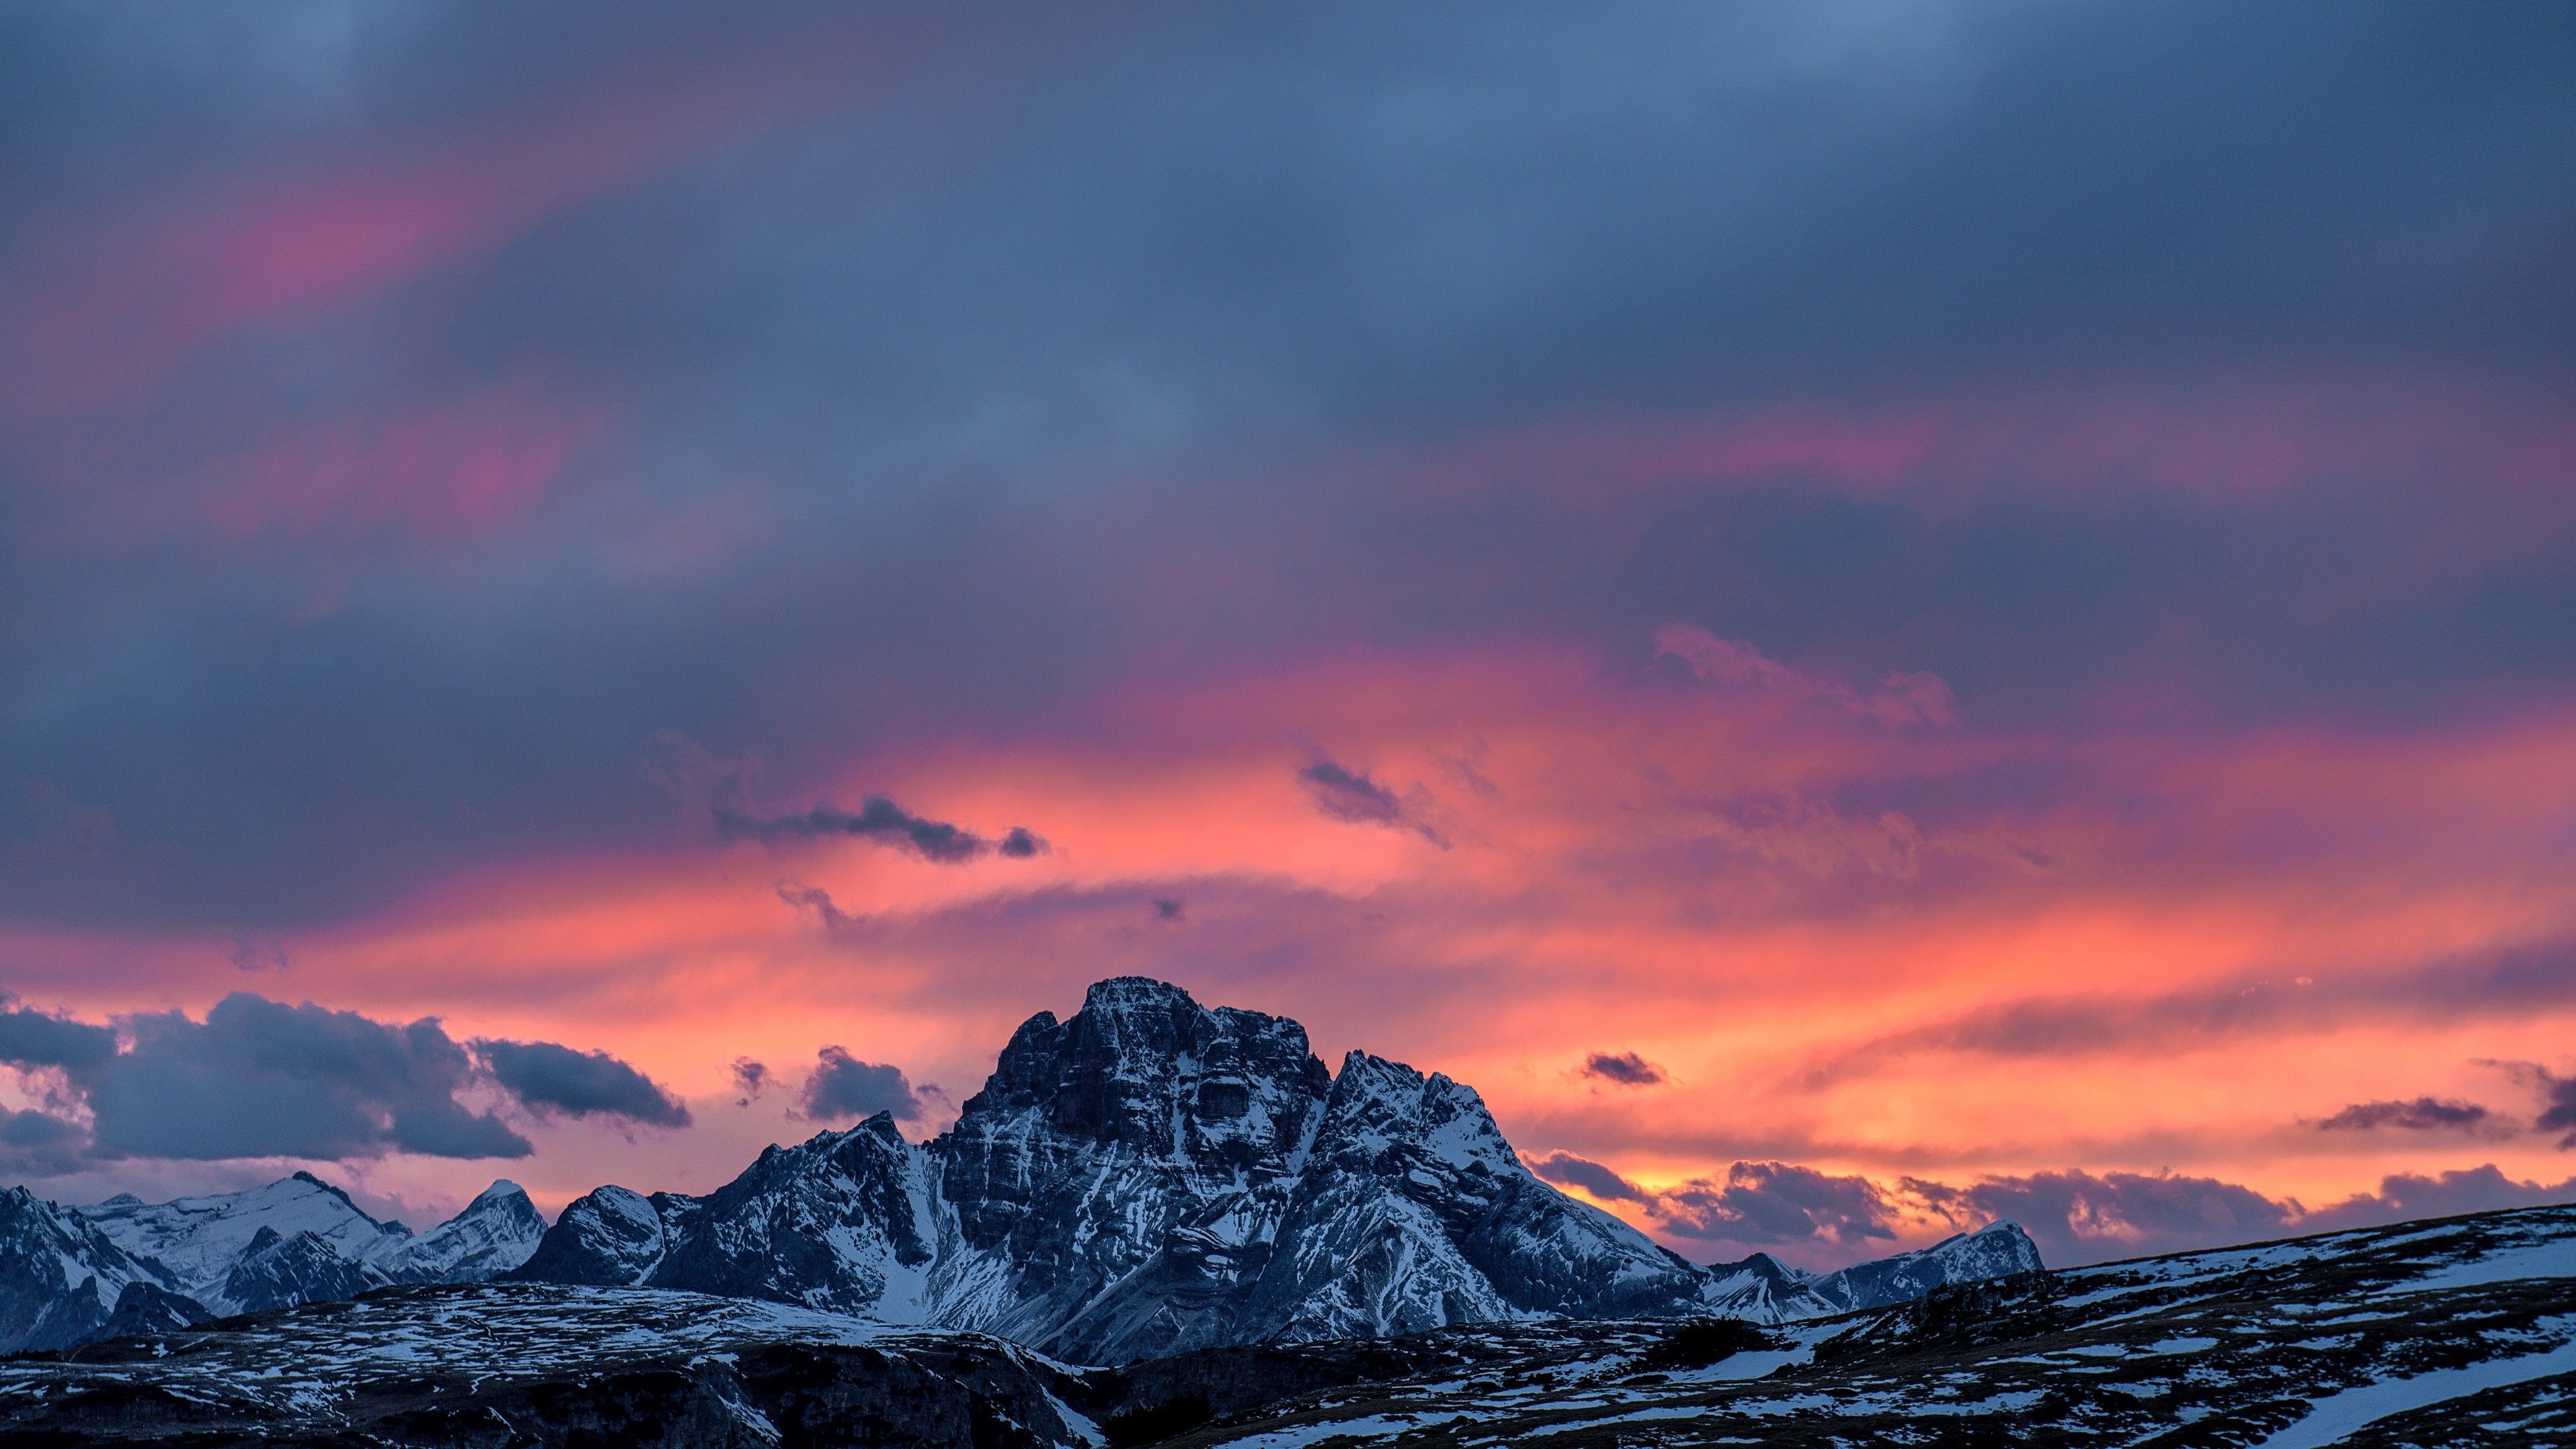 Sunset 4K Mountain Photography 2021 Wallpapers